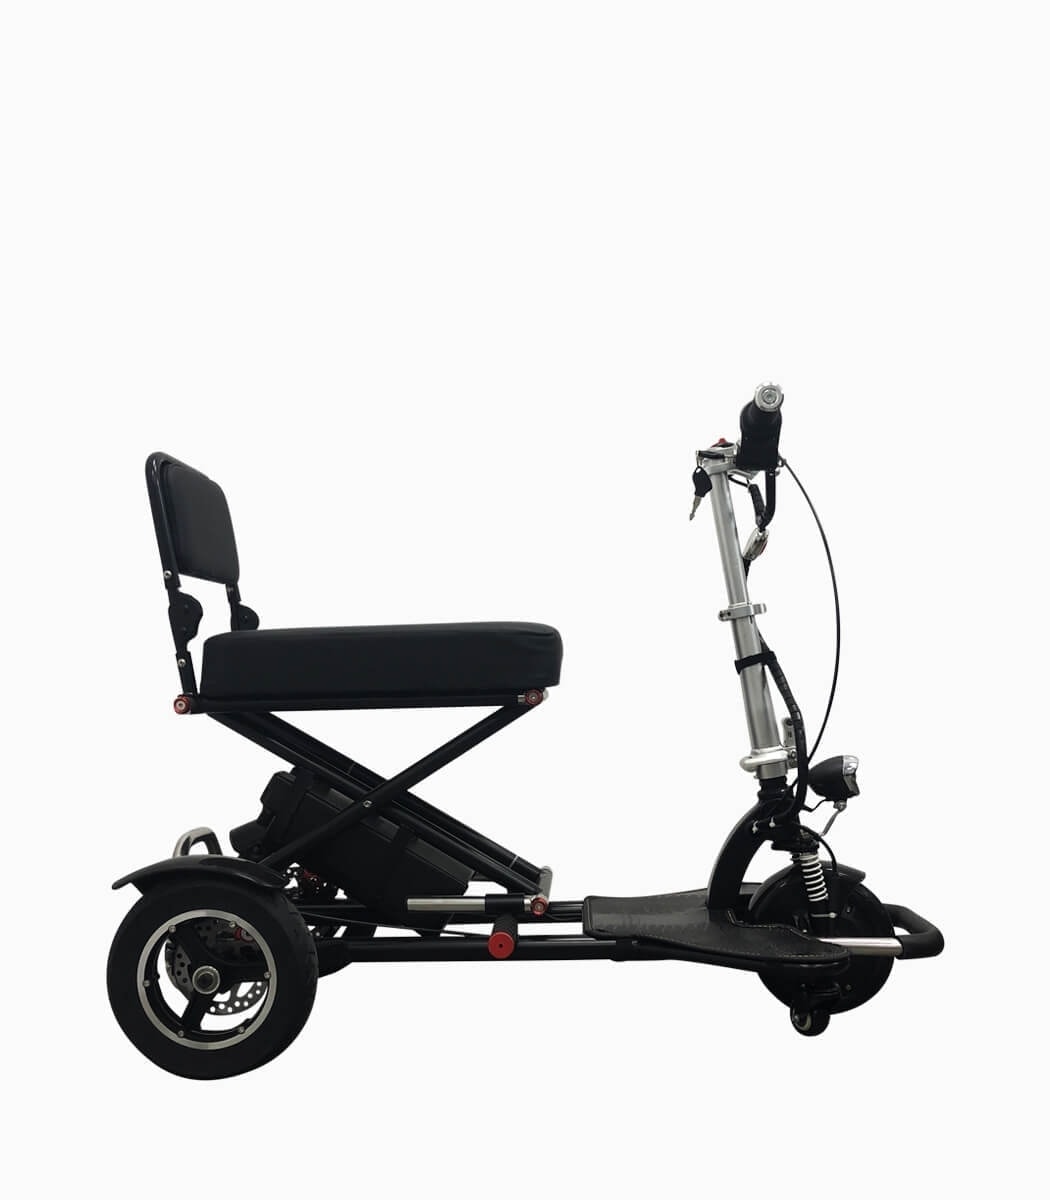 MOBOT FLEXI MAX (BLACK12AH) 3 wheel mobility scooter right